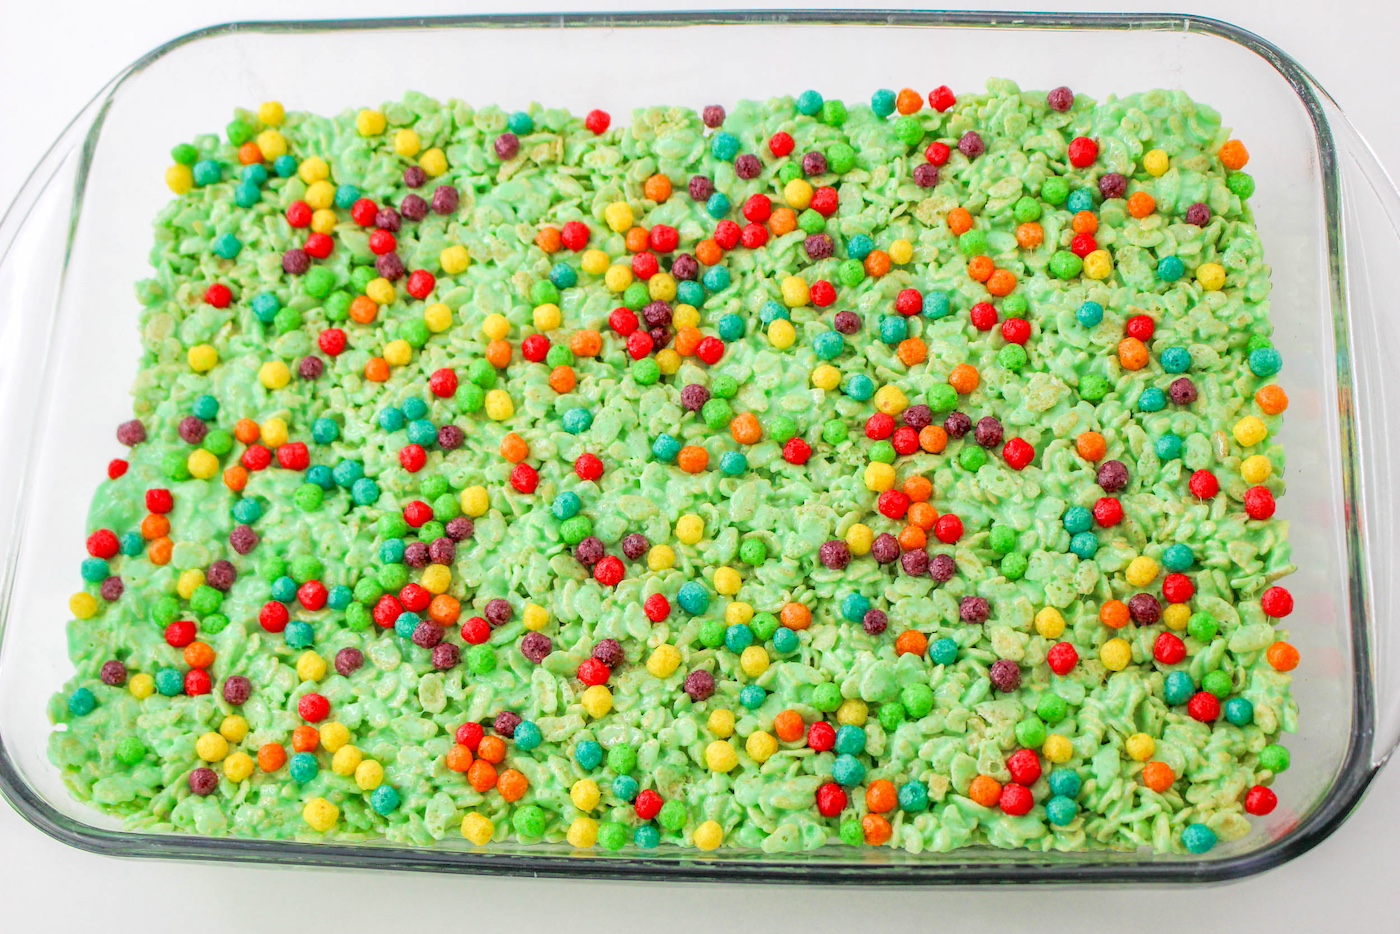 Trix added to the top of the rice krispies as ornaments